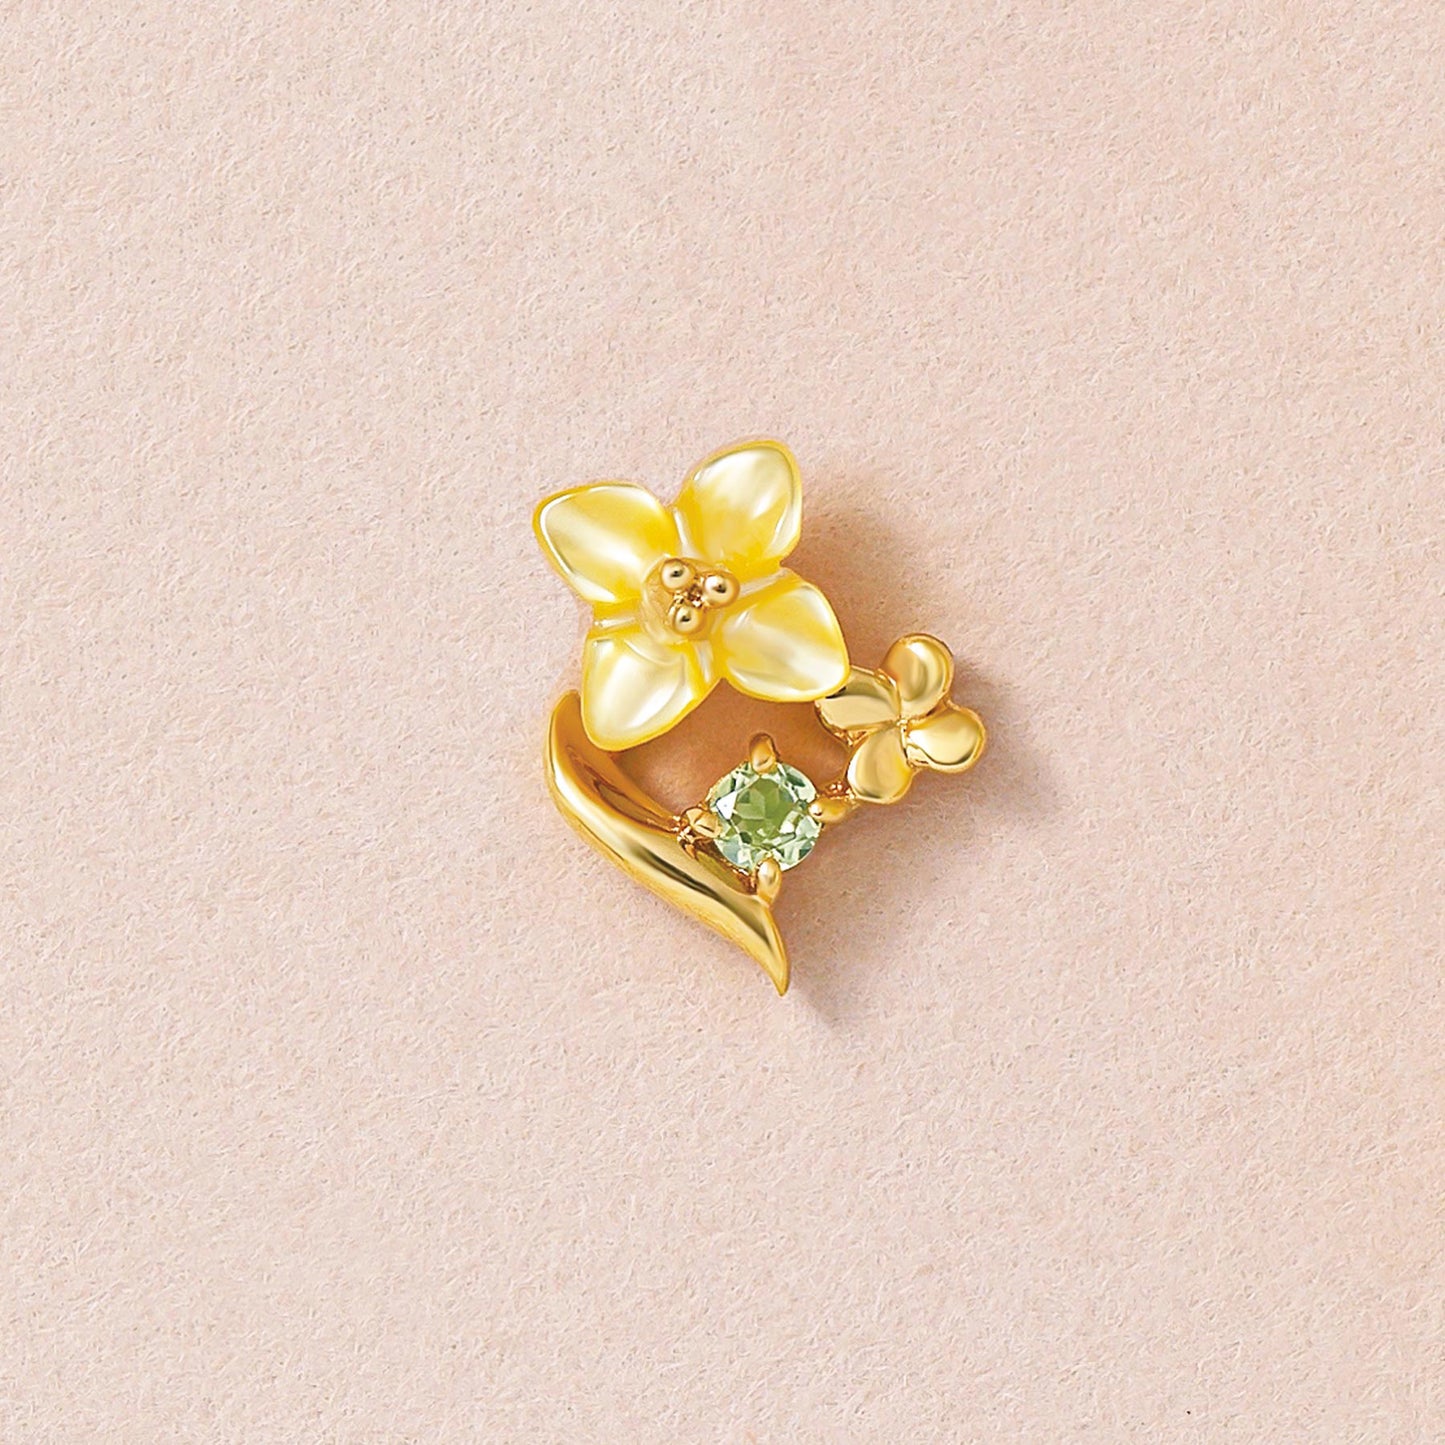 [GARDEN] 925 Sterling Silver / 10K Yellow Gold Yellow Shell Rape Blossoms Single Earring - Product Image